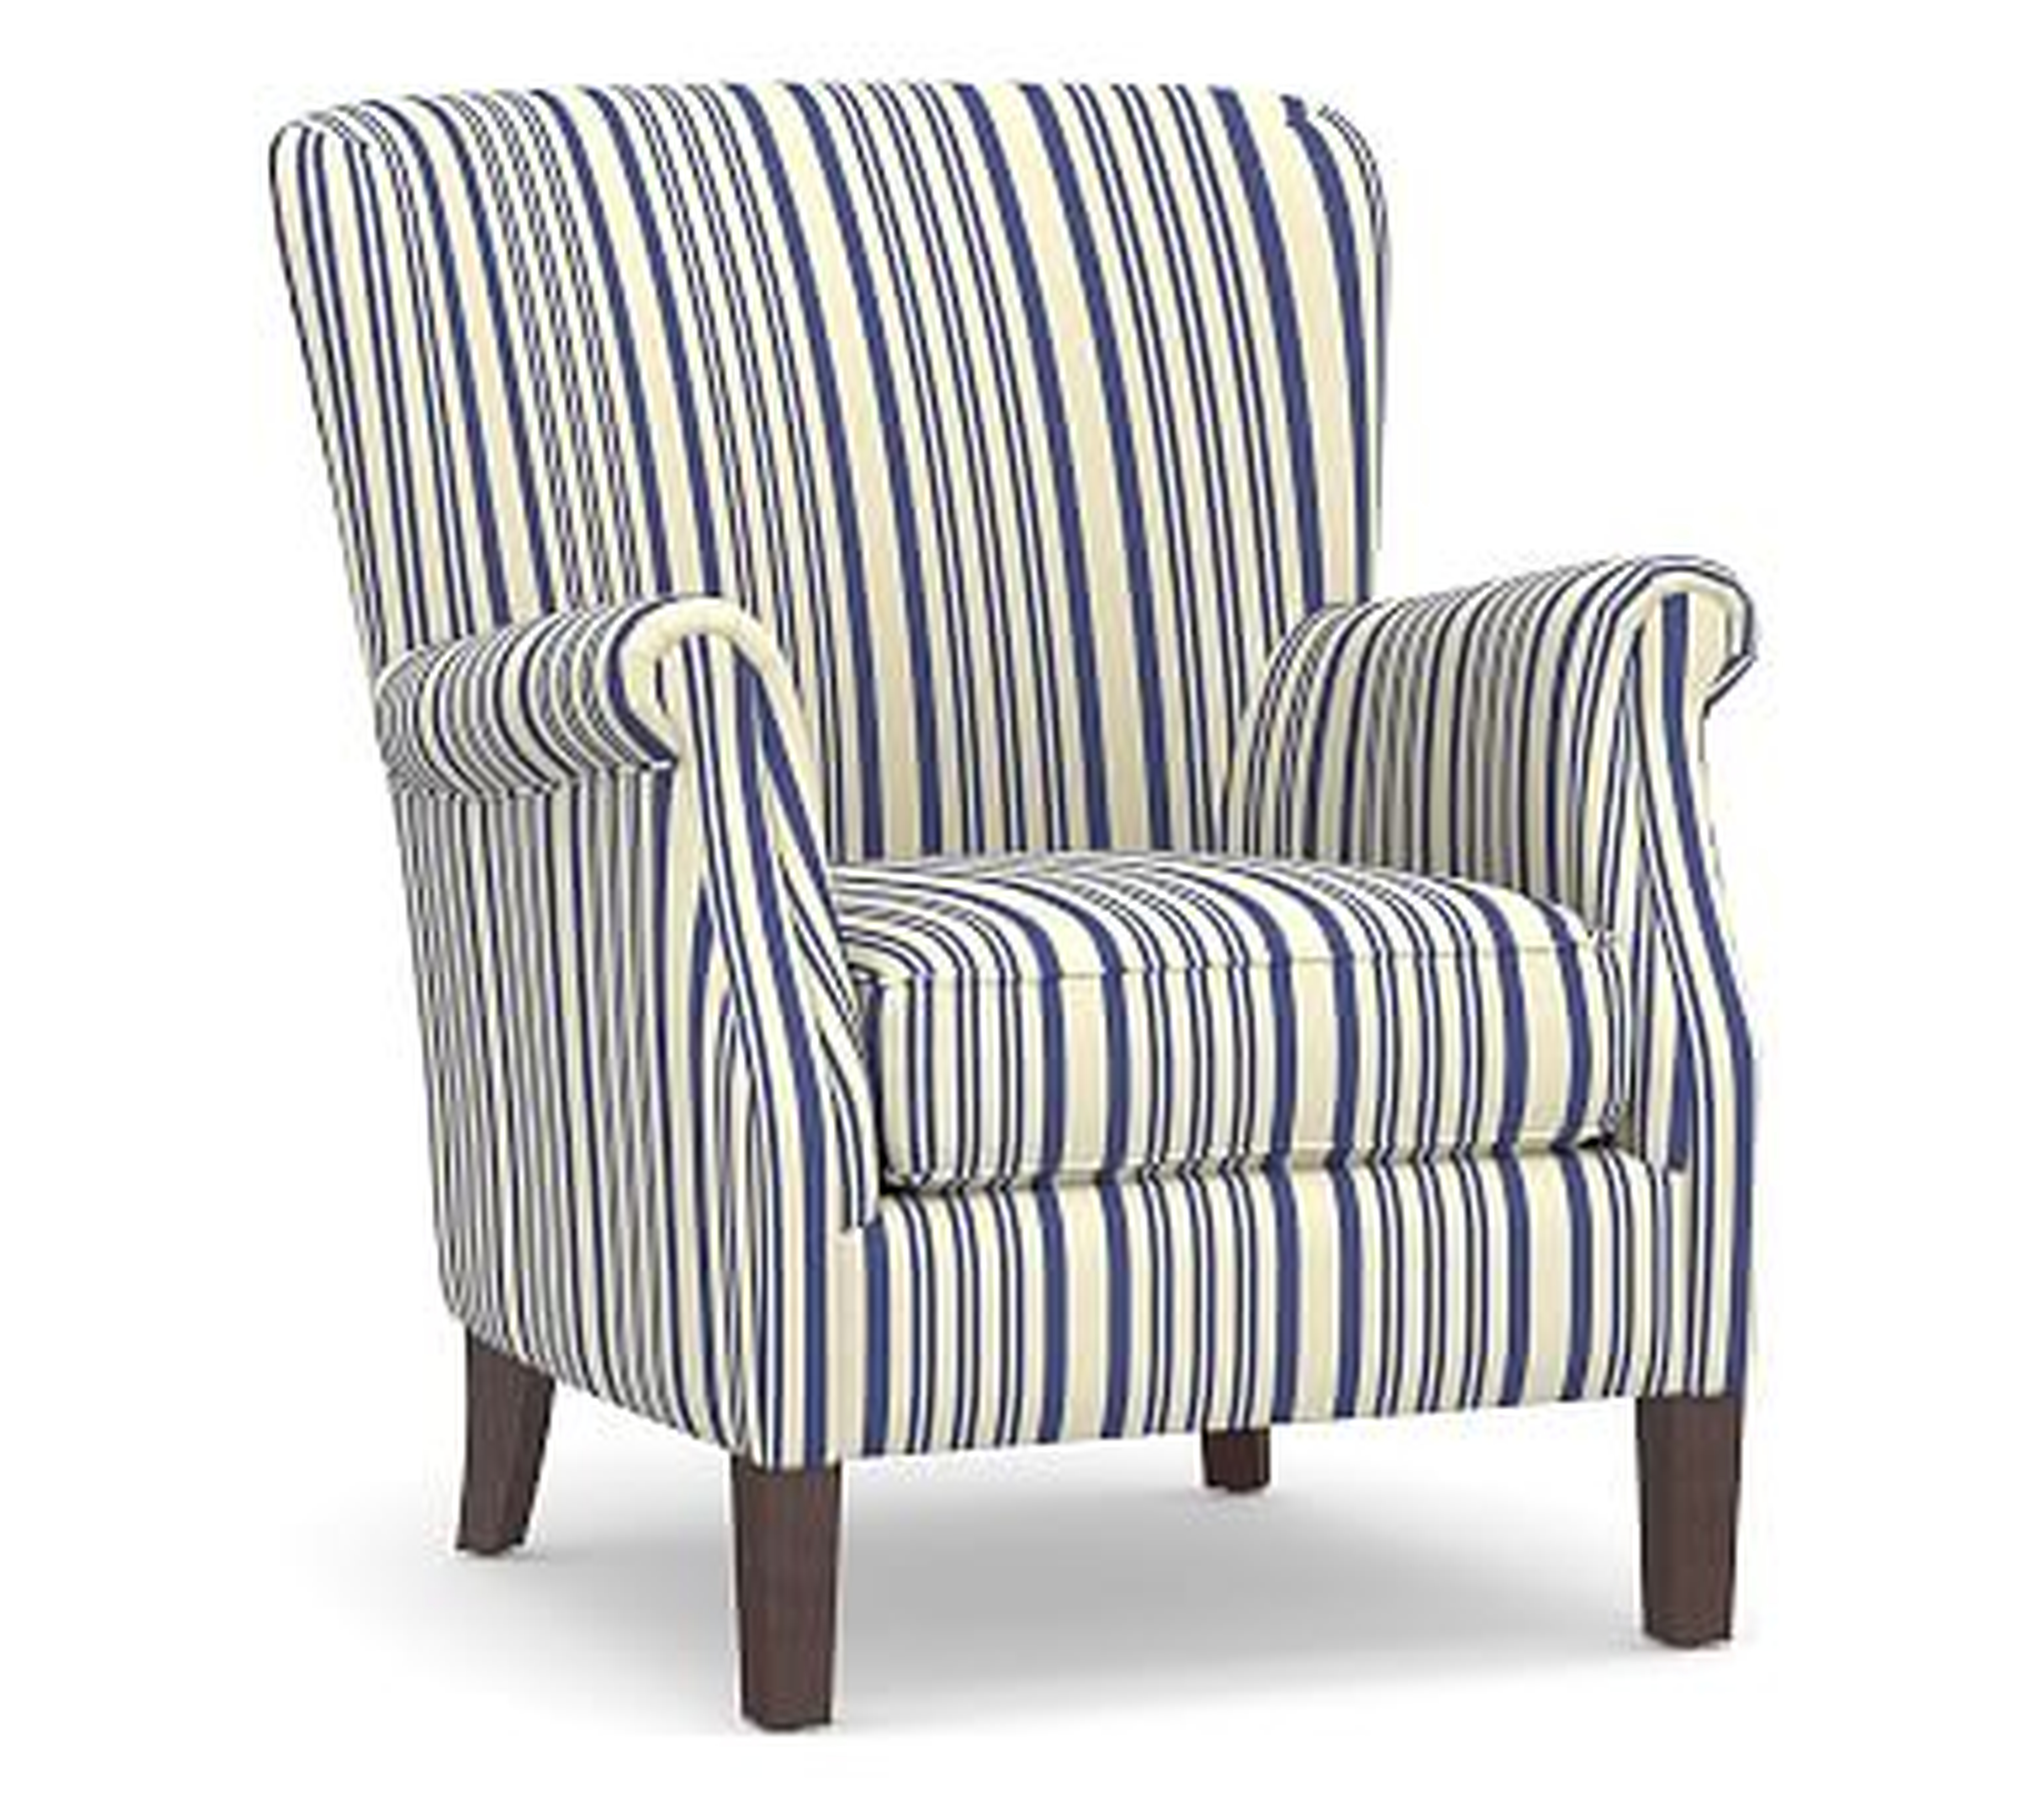 SoMa Minna Upholstered Armchair, Polyester Wrapped Cushions, Antique Stripe Blue - Pottery Barn